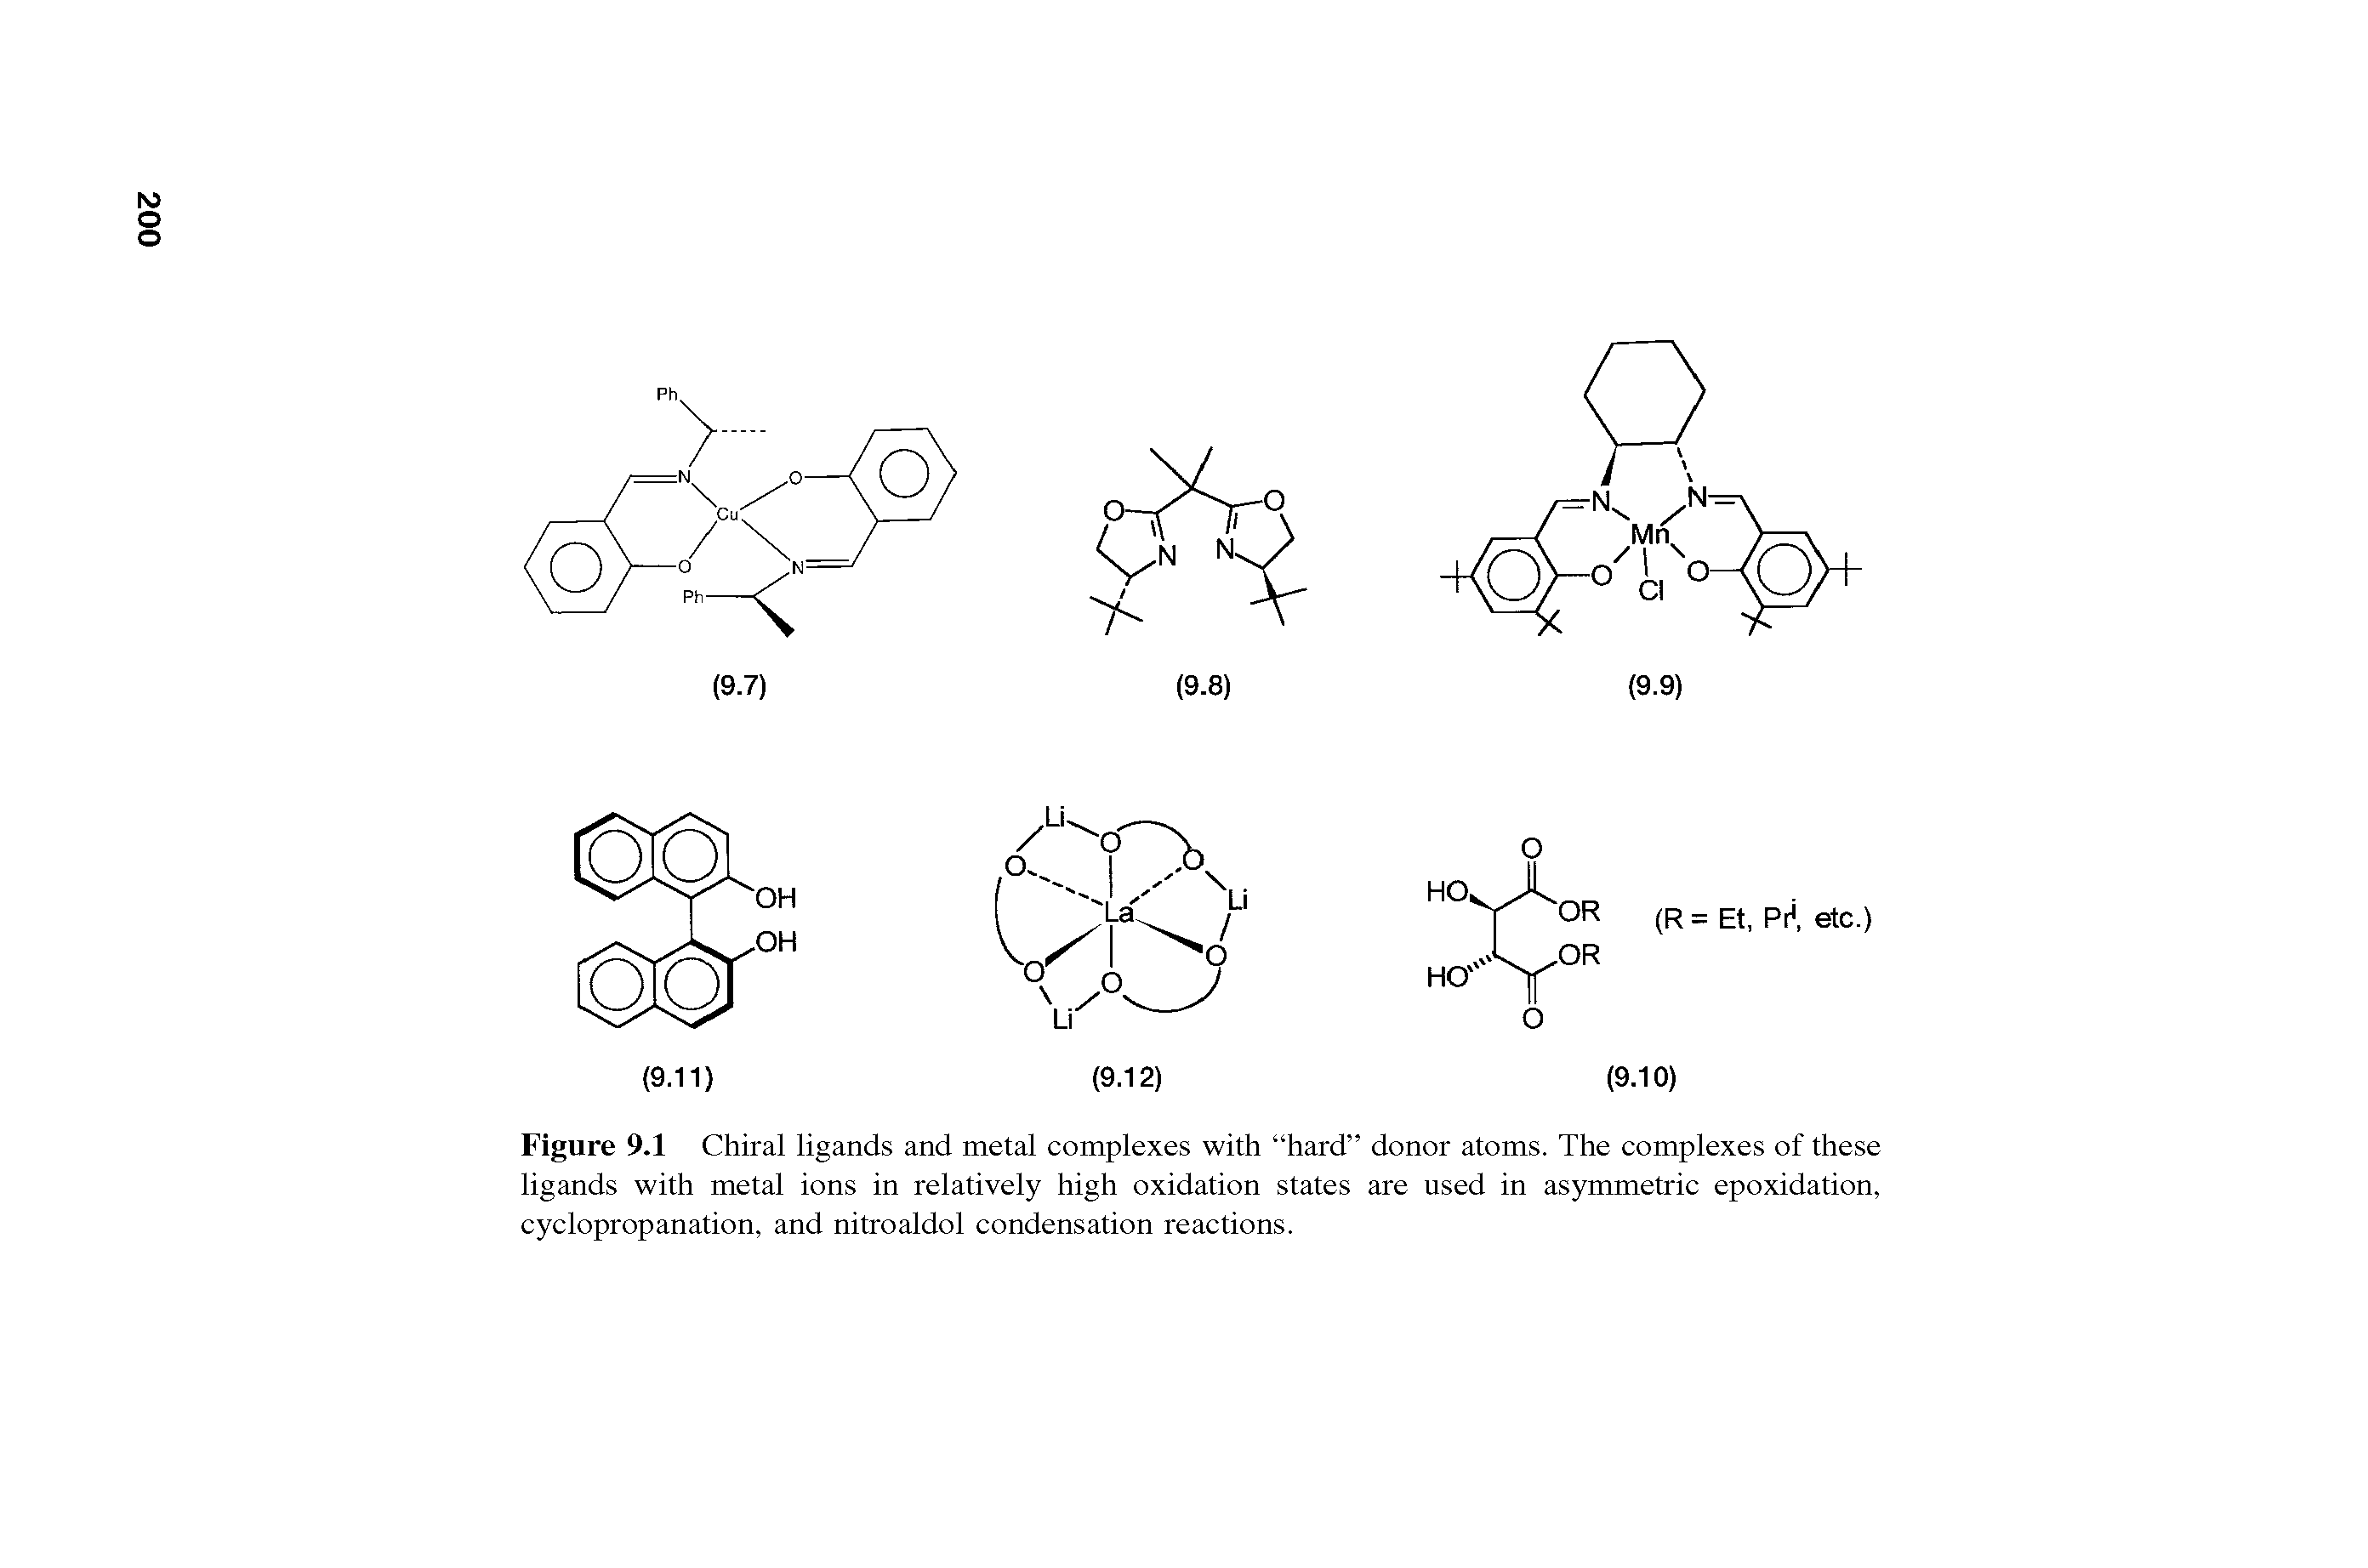 Figure 9.1 Chiral ligands and metal complexes with hard donor atoms. The complexes of these ligands with metal ions in relatively high oxidation states are used in asymmetric epoxidation, cyclopropanation, and nitroaldol condensation reactions.